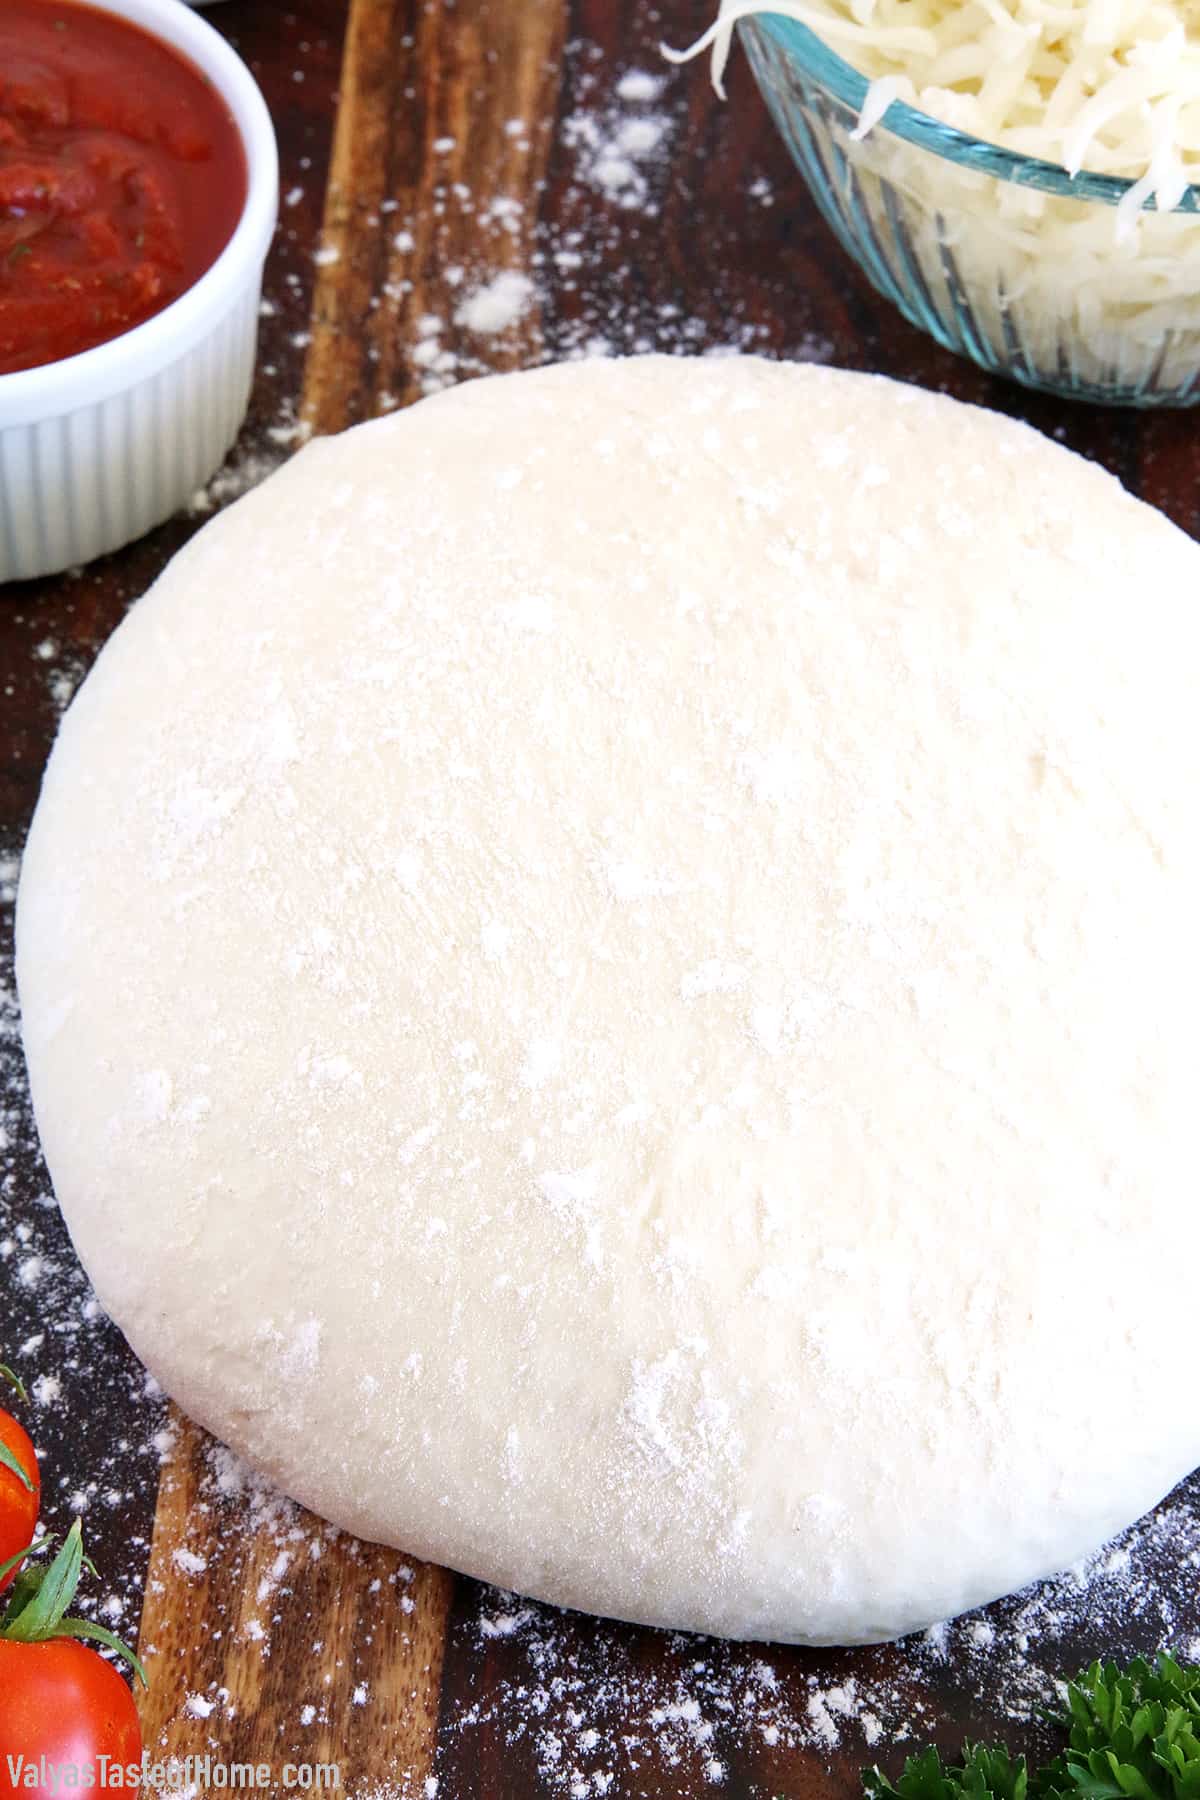 Homemade dough always tastes better and you can also customize it by adding dried herbs on top or increasing or decreasing the amount of salt in it.